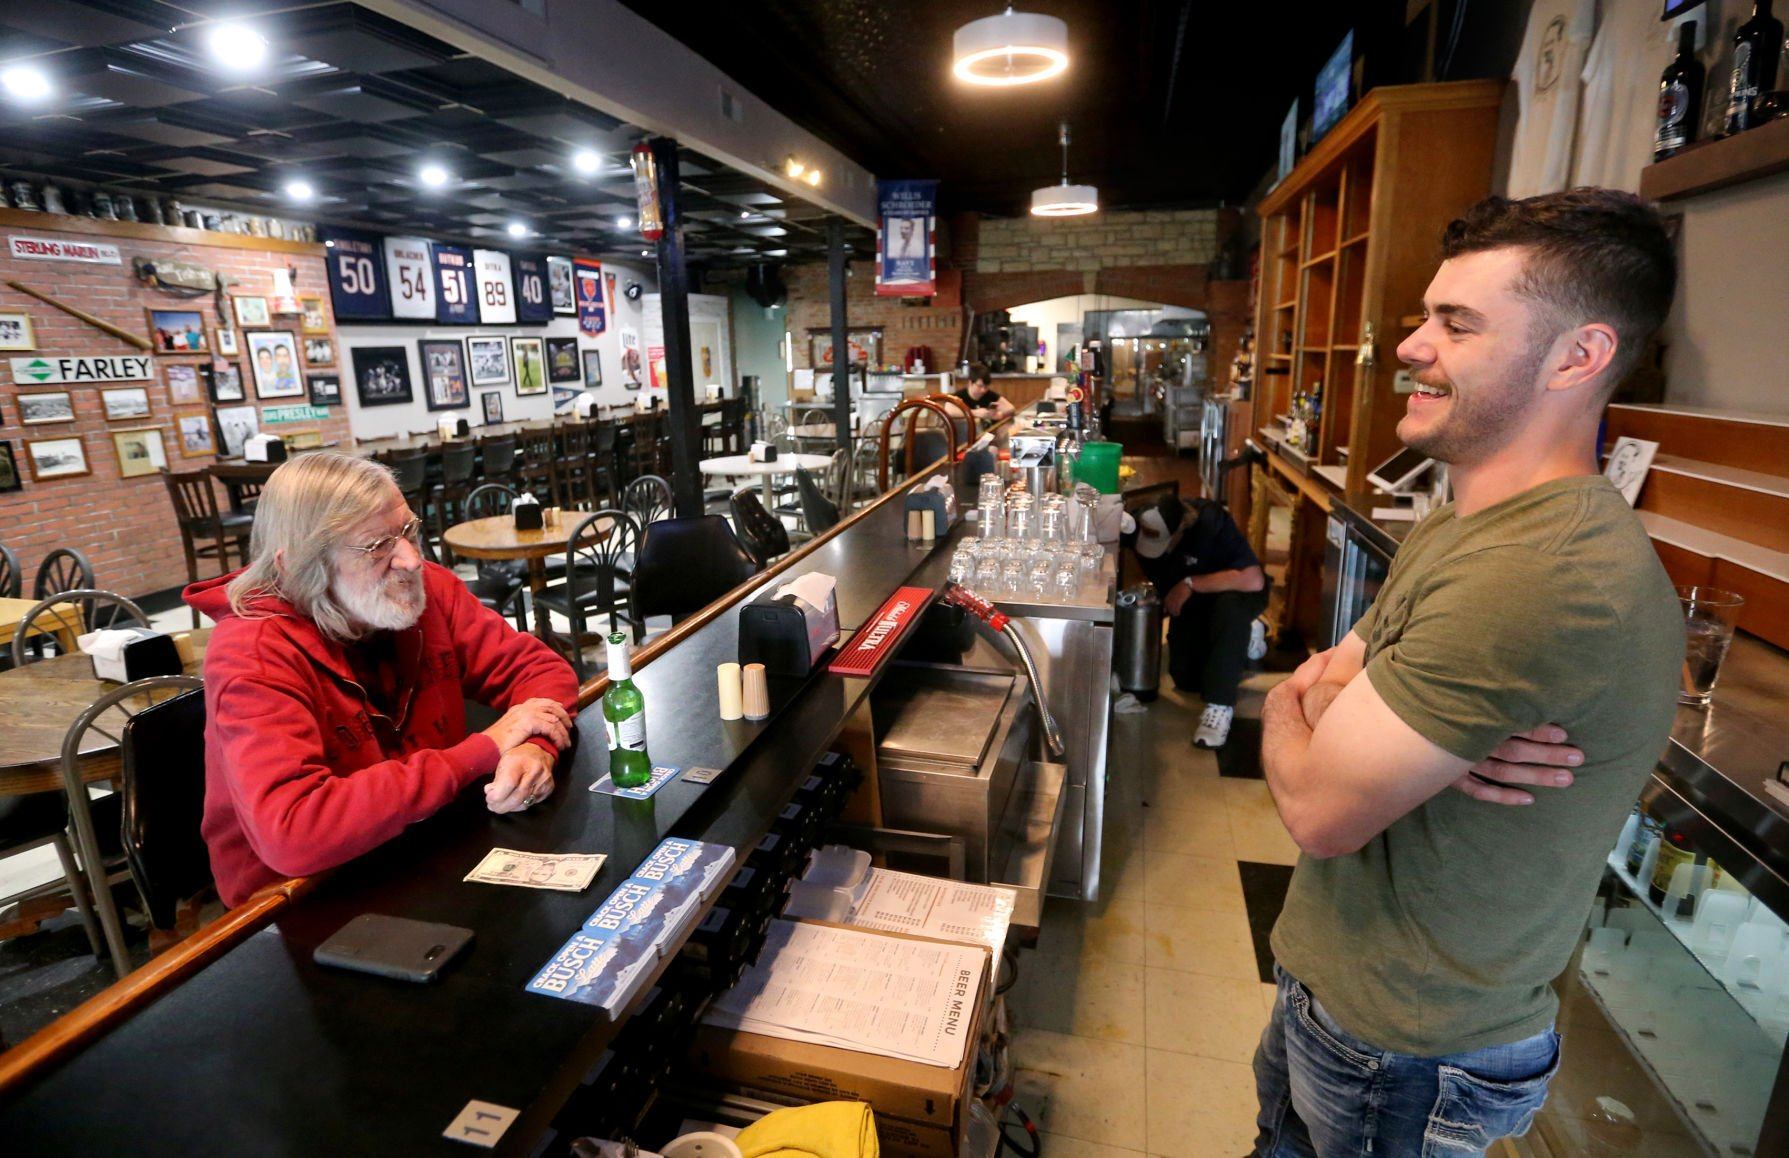 Owner Jacob Schroeder (right) talks with Bill Einwalter, of Farley, Iowa, at Bill’s Tap in Farley on Wednesday.    PHOTO CREDIT: JESSICA REILLY